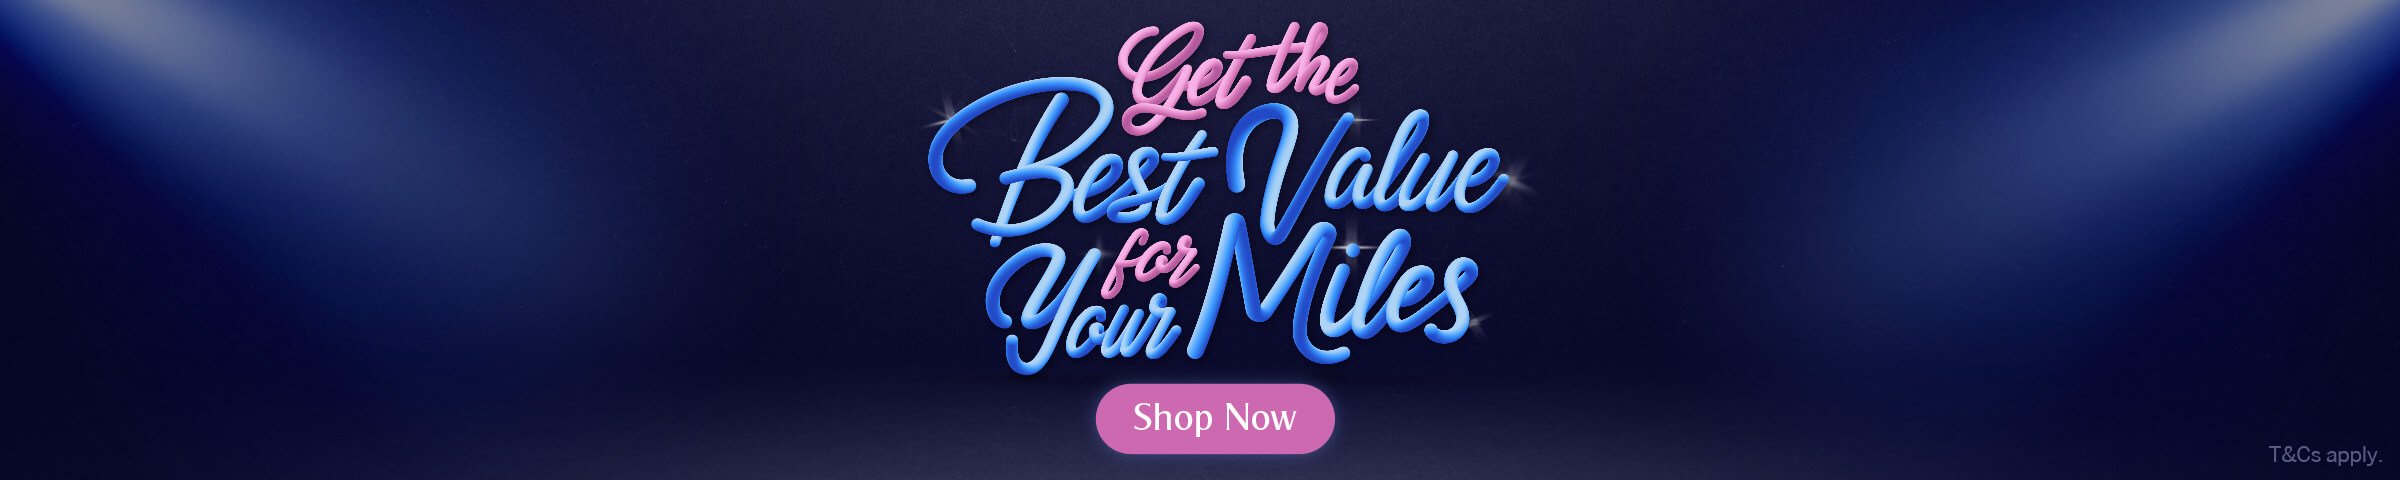 KrisShop Get The Best Value For Your Miles